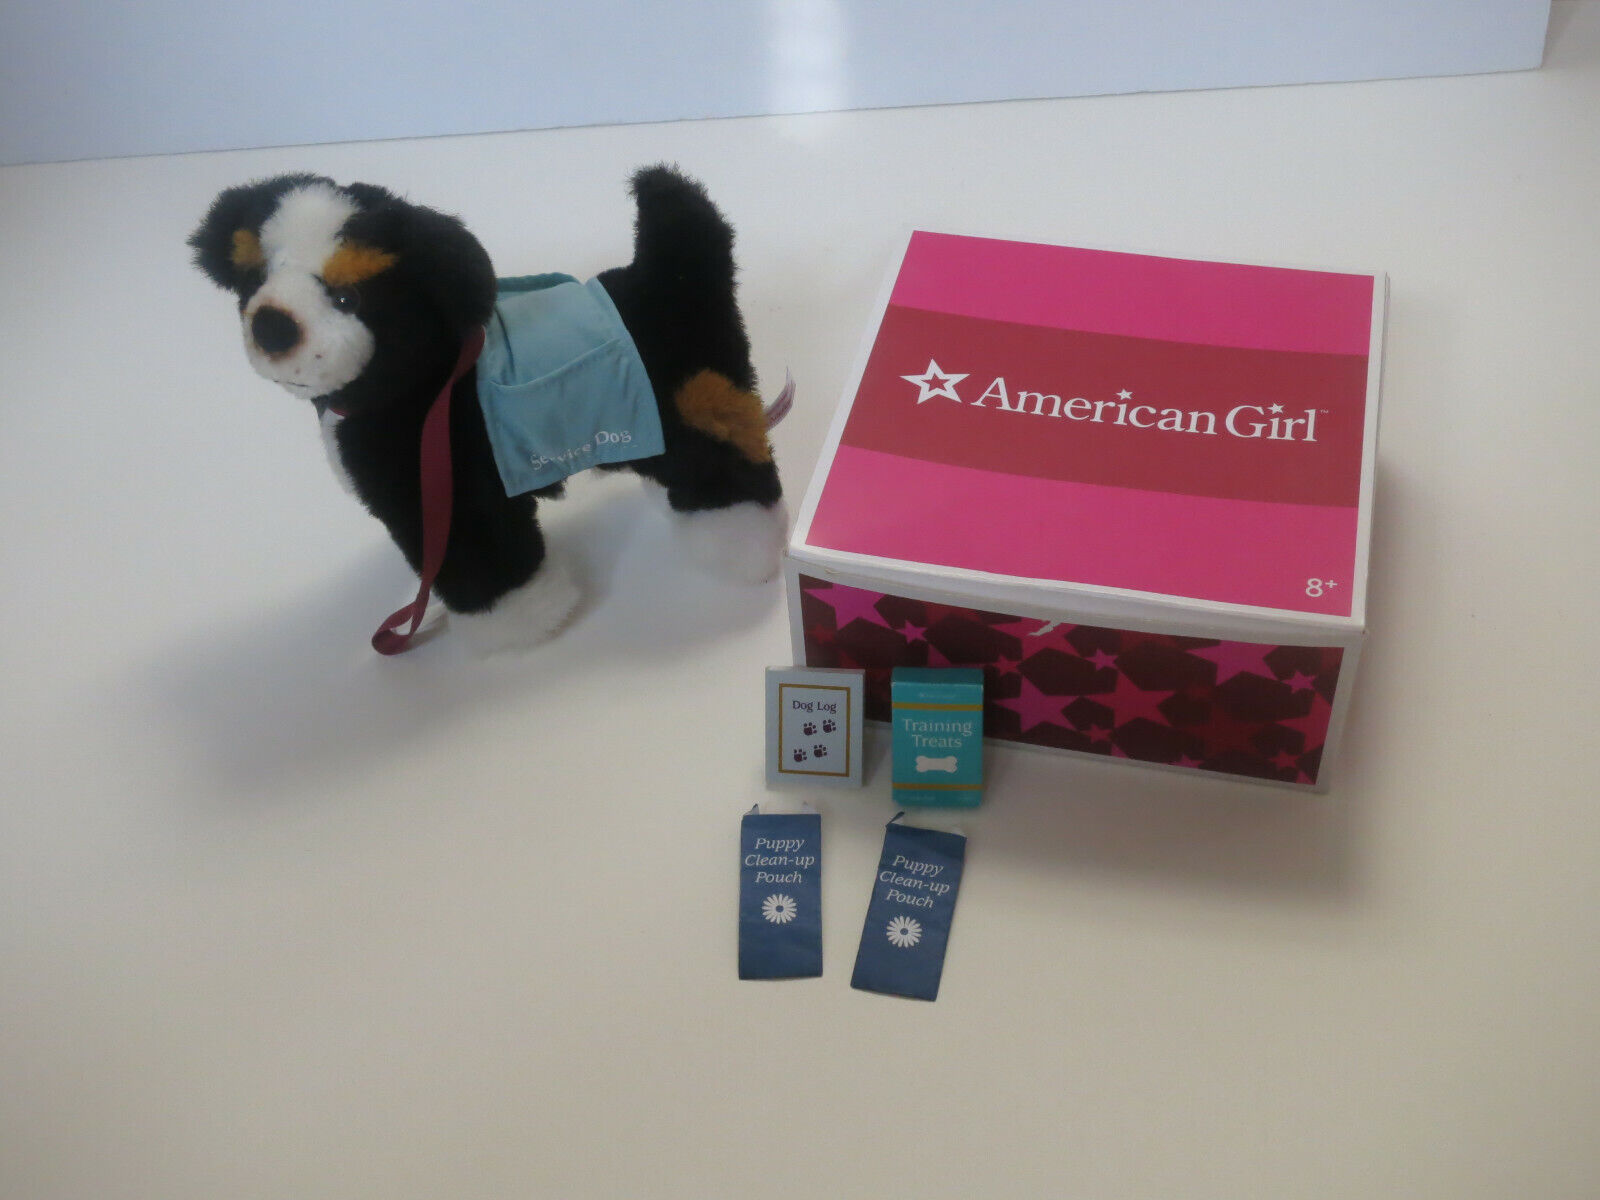 American Girl Doll Nicki Service box with Retired excellence Dog National uniform free shipping original